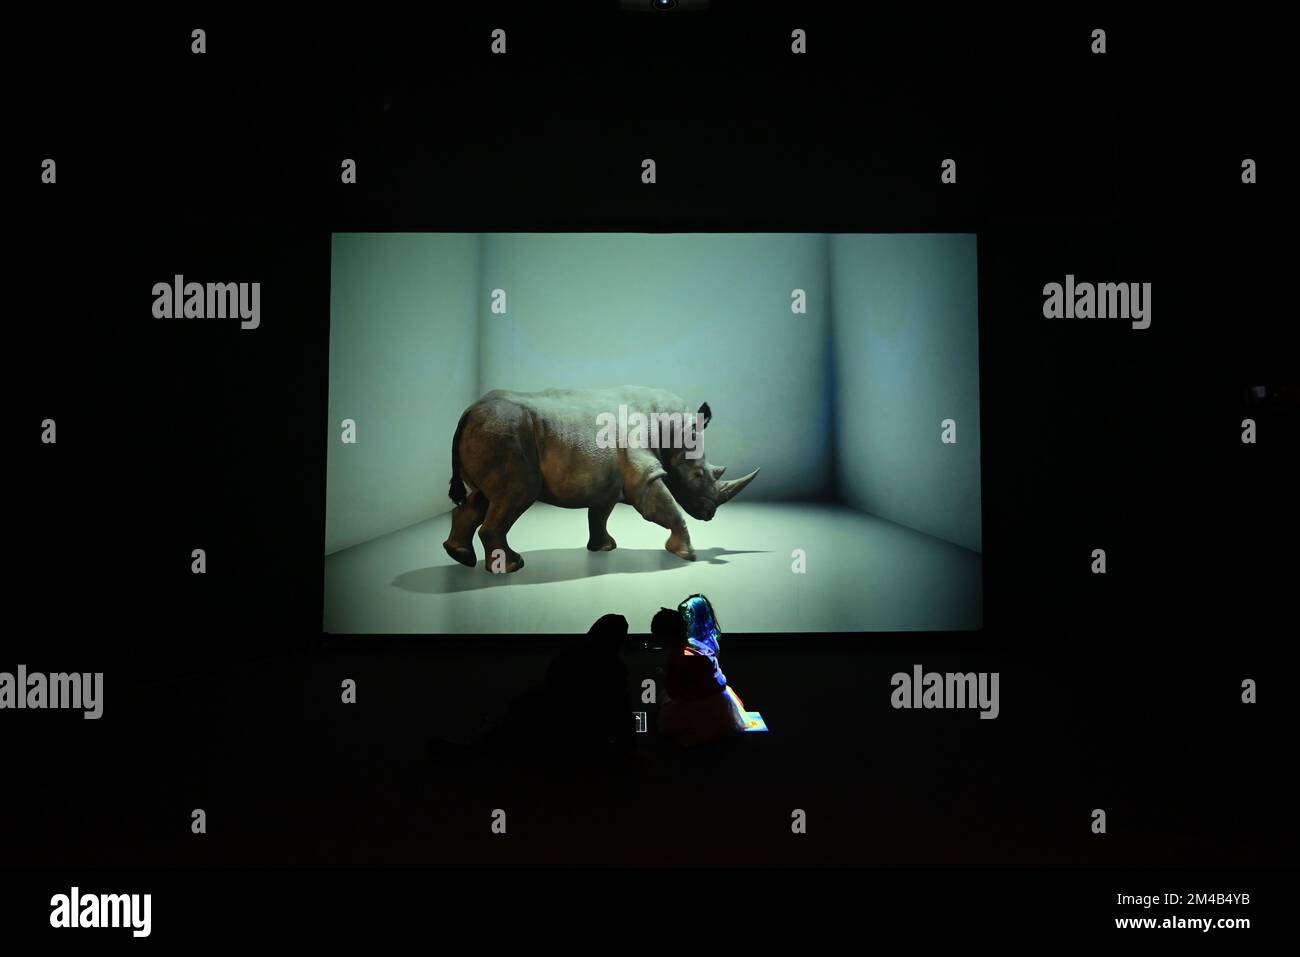 The Substitute, a video installation by artist Alexandra Daisy Ginsberg that brings visitors face-to-face with a digitally recreated, life-sized northern white rhino. With the subspecies nearly extinct, this piece explores the paradox of our preoccupation with creating new life forms, while neglecting existing ones. There are only 2 females left in the World once they die this species will become extinct ... Stock Photo